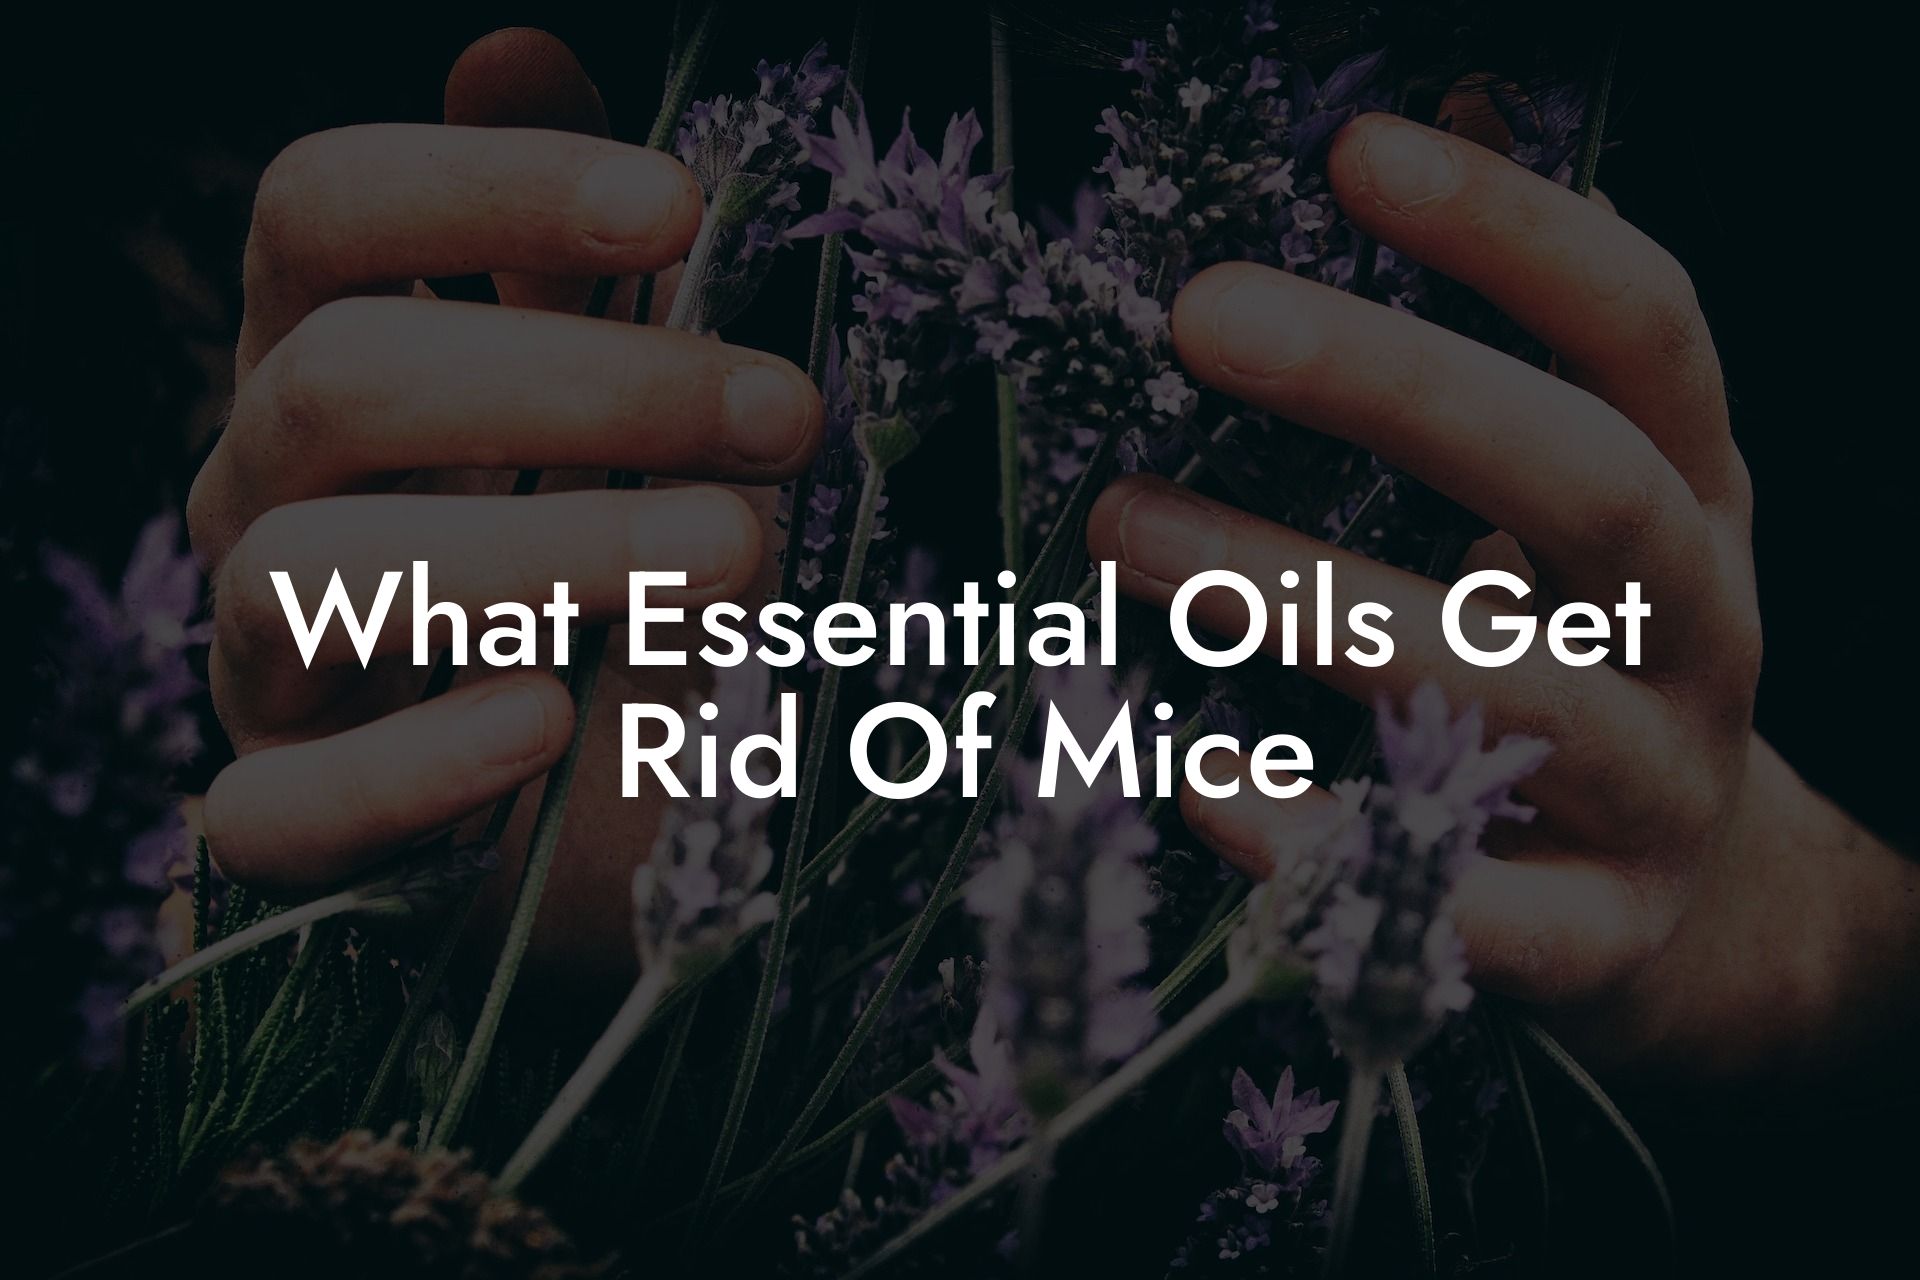 What Essential Oils Get Rid Of Mice